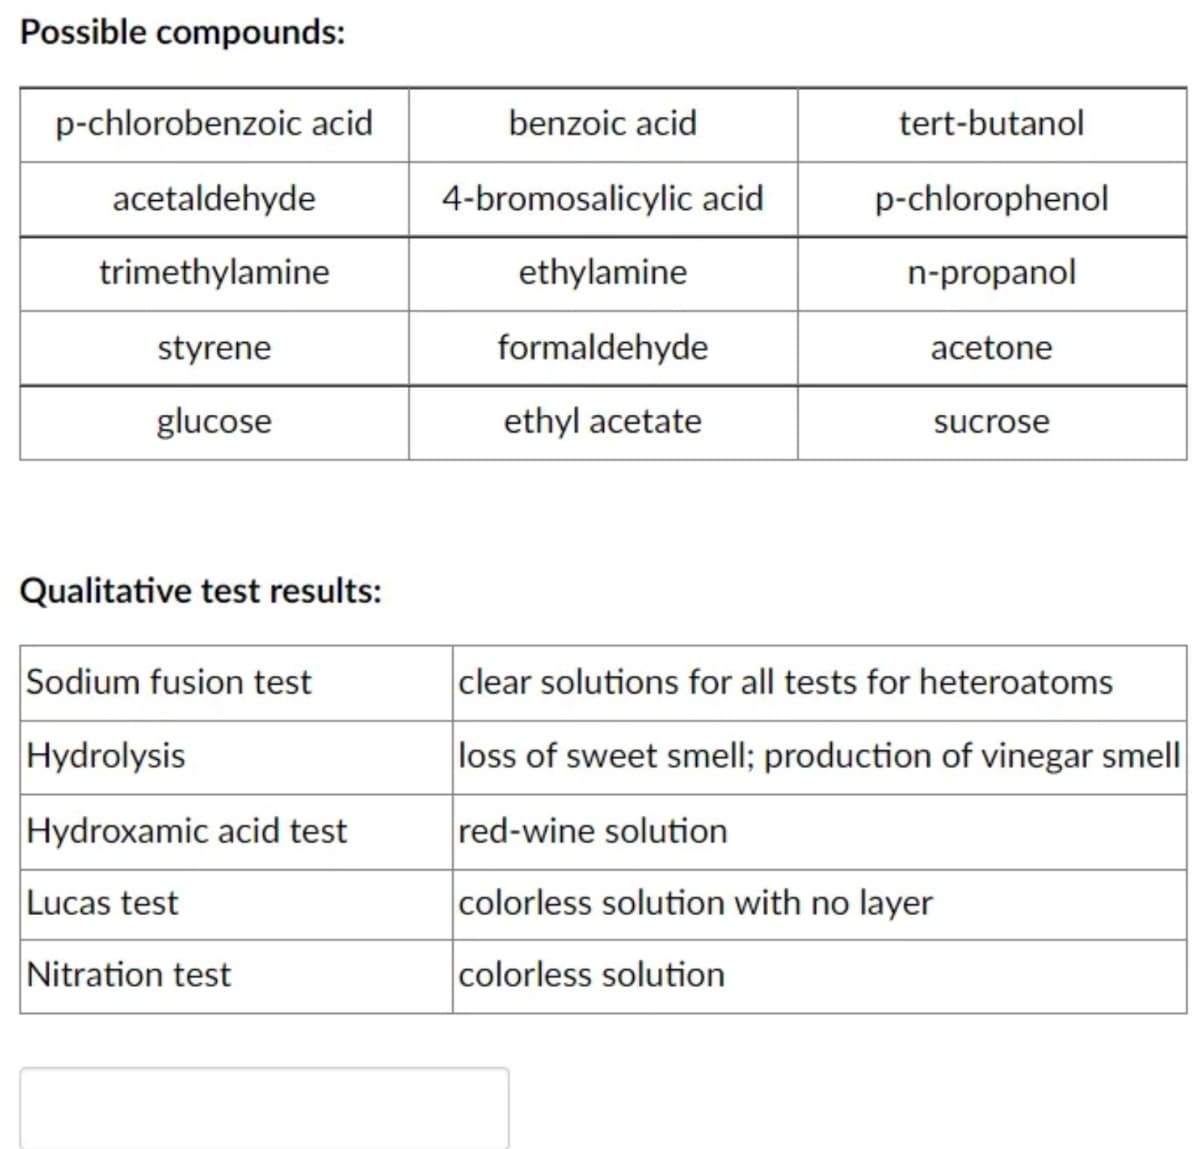 Possible compounds:
p-chlorobenzoic acid
acetaldehyde
trimethylamine
styrene
glucose
Qualitative test results:
Sodium fusion test
Hydrolysis
Hydroxamic acid test
Lucas test
Nitration test
benzoic acid
4-bromosalicylic acid
ethylamine
formaldehyde
ethyl acetate
tert-butanol
p-chlorophenol
n-propanol
acetone
sucrose
clear solutions for all tests for heteroatoms
loss of sweet smell; production of vinegar smell
red-wine solution
colorless solution with no layer
colorless solution